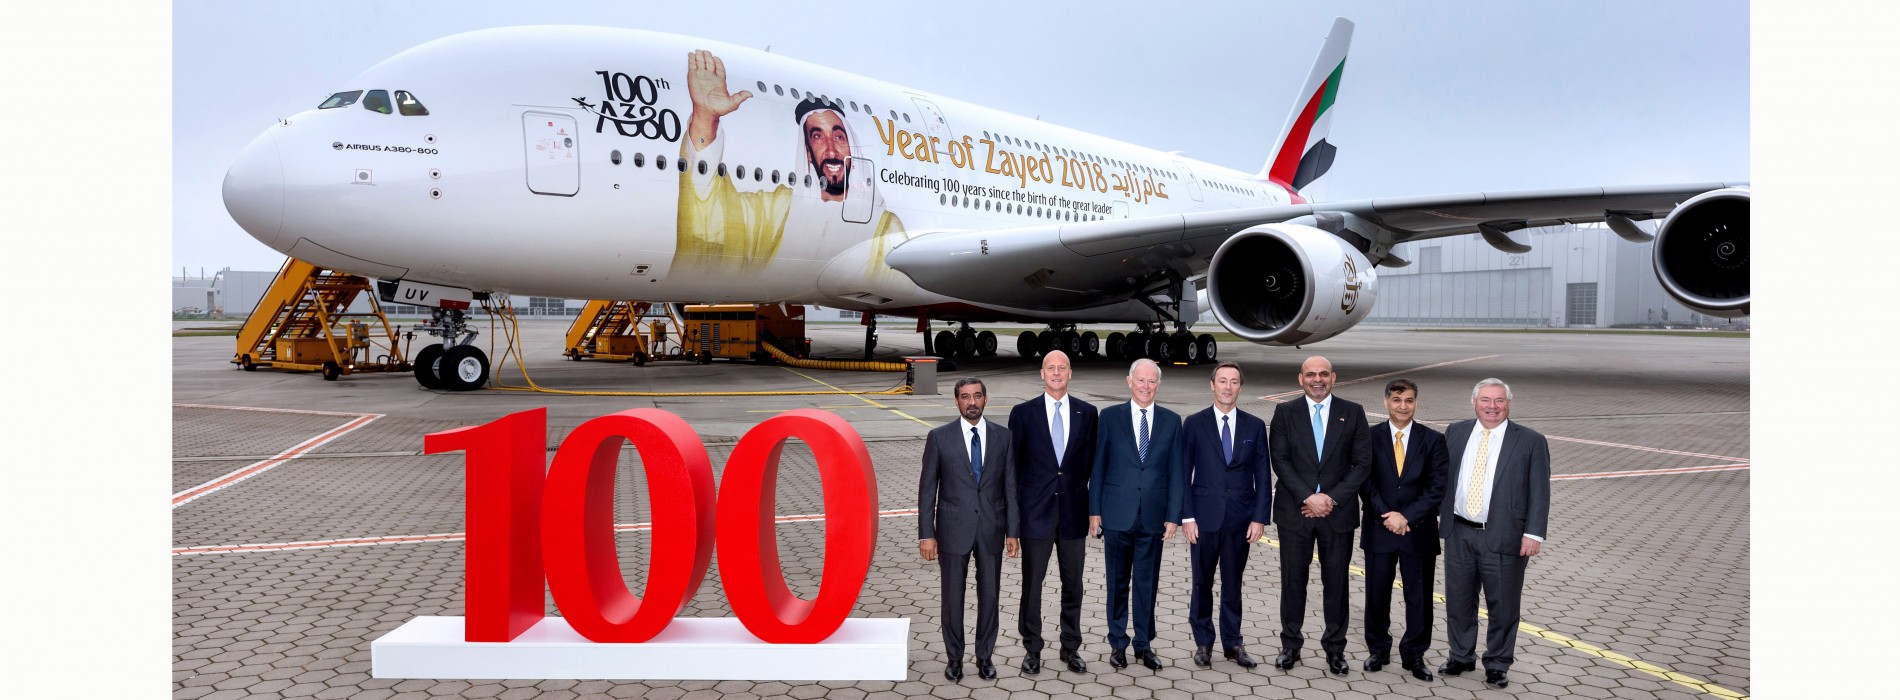 Emirates is celebrating 10 years of A380 operations